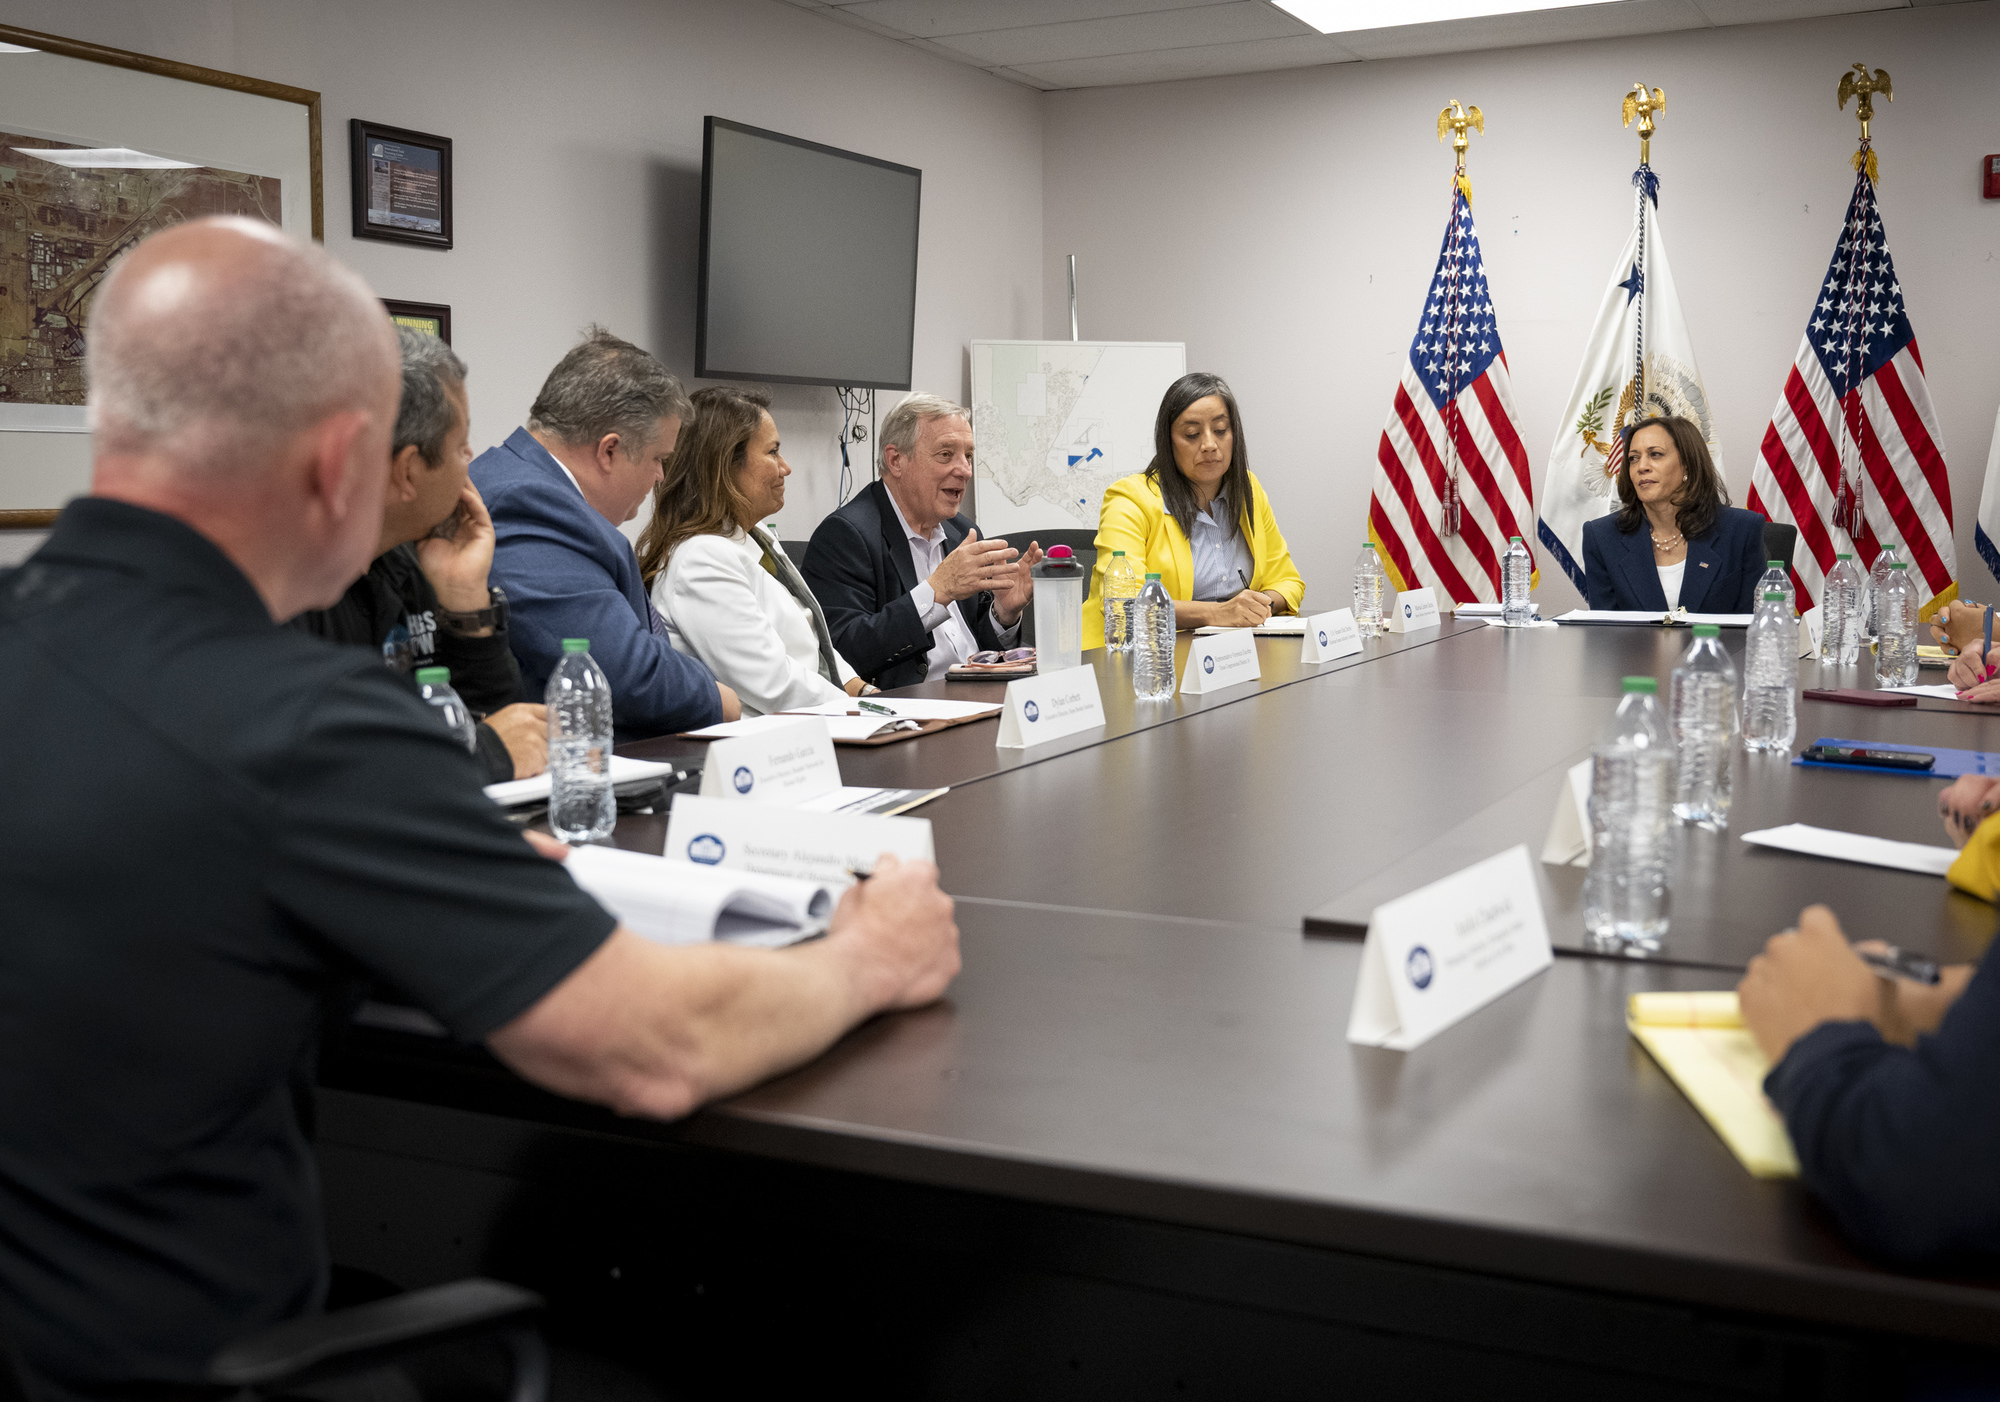 Vice President Harris leads a meeting with El Paso community leaders